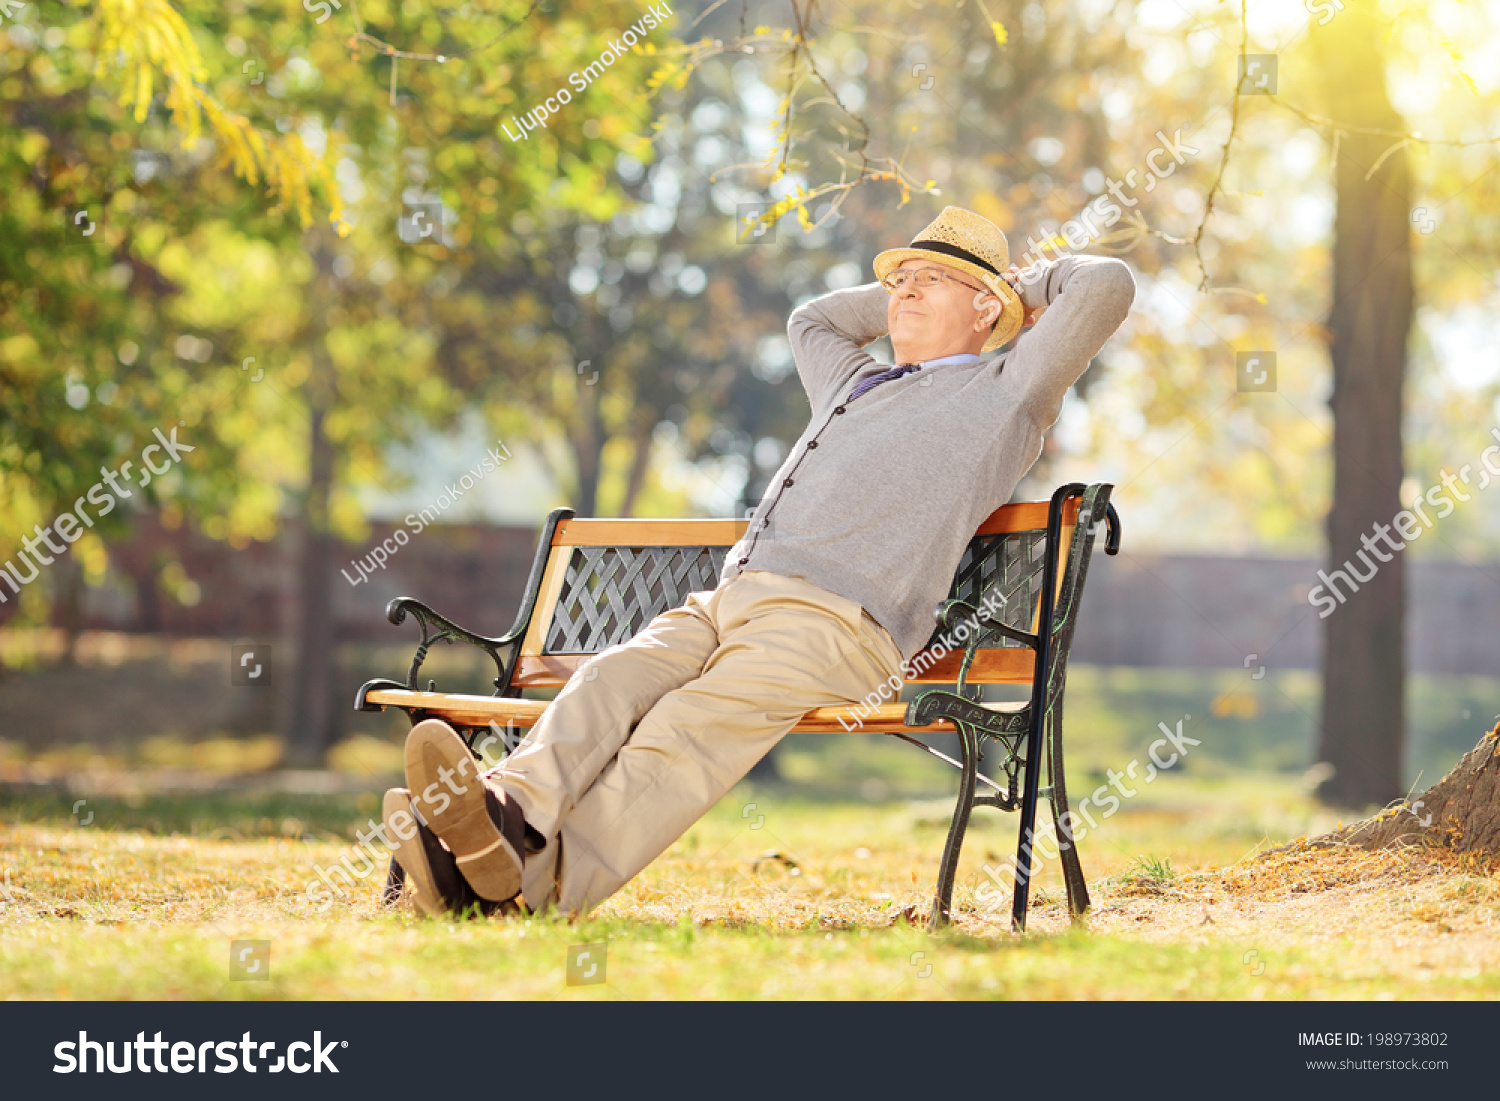 Senior man relaxing in park on a sunny day seated on a wooden bench #198973802